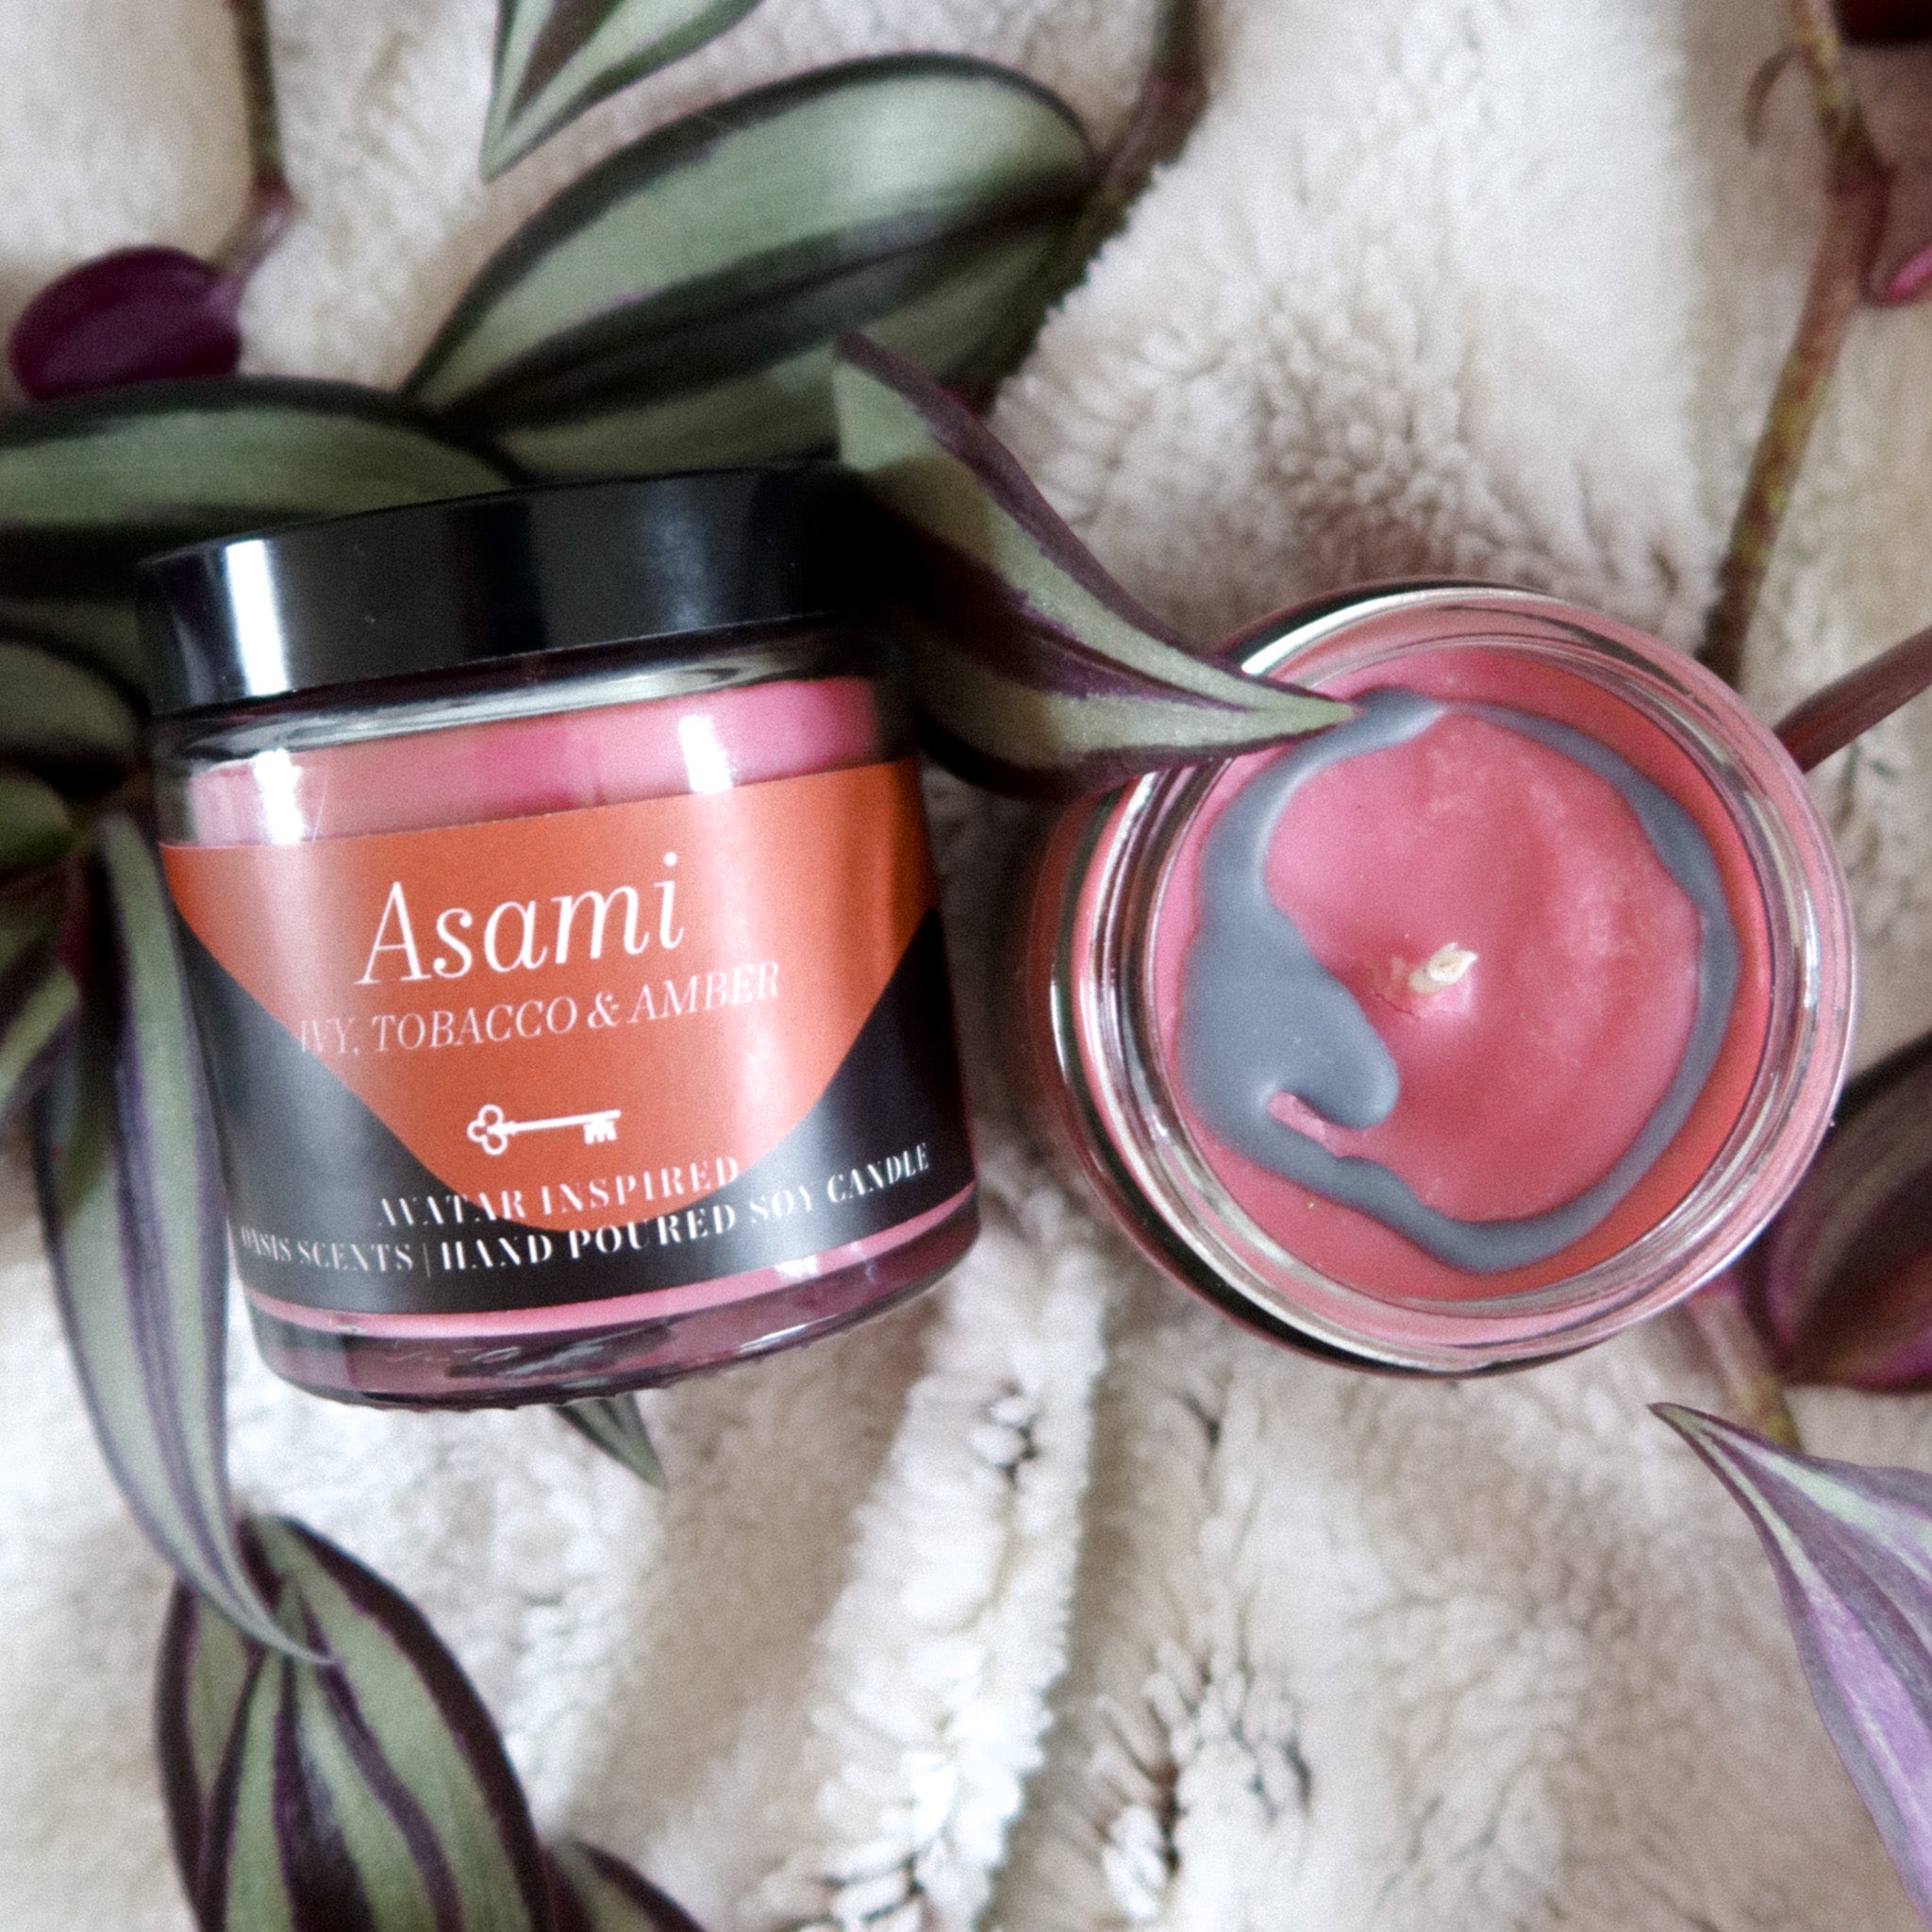 Asami Soy Candle